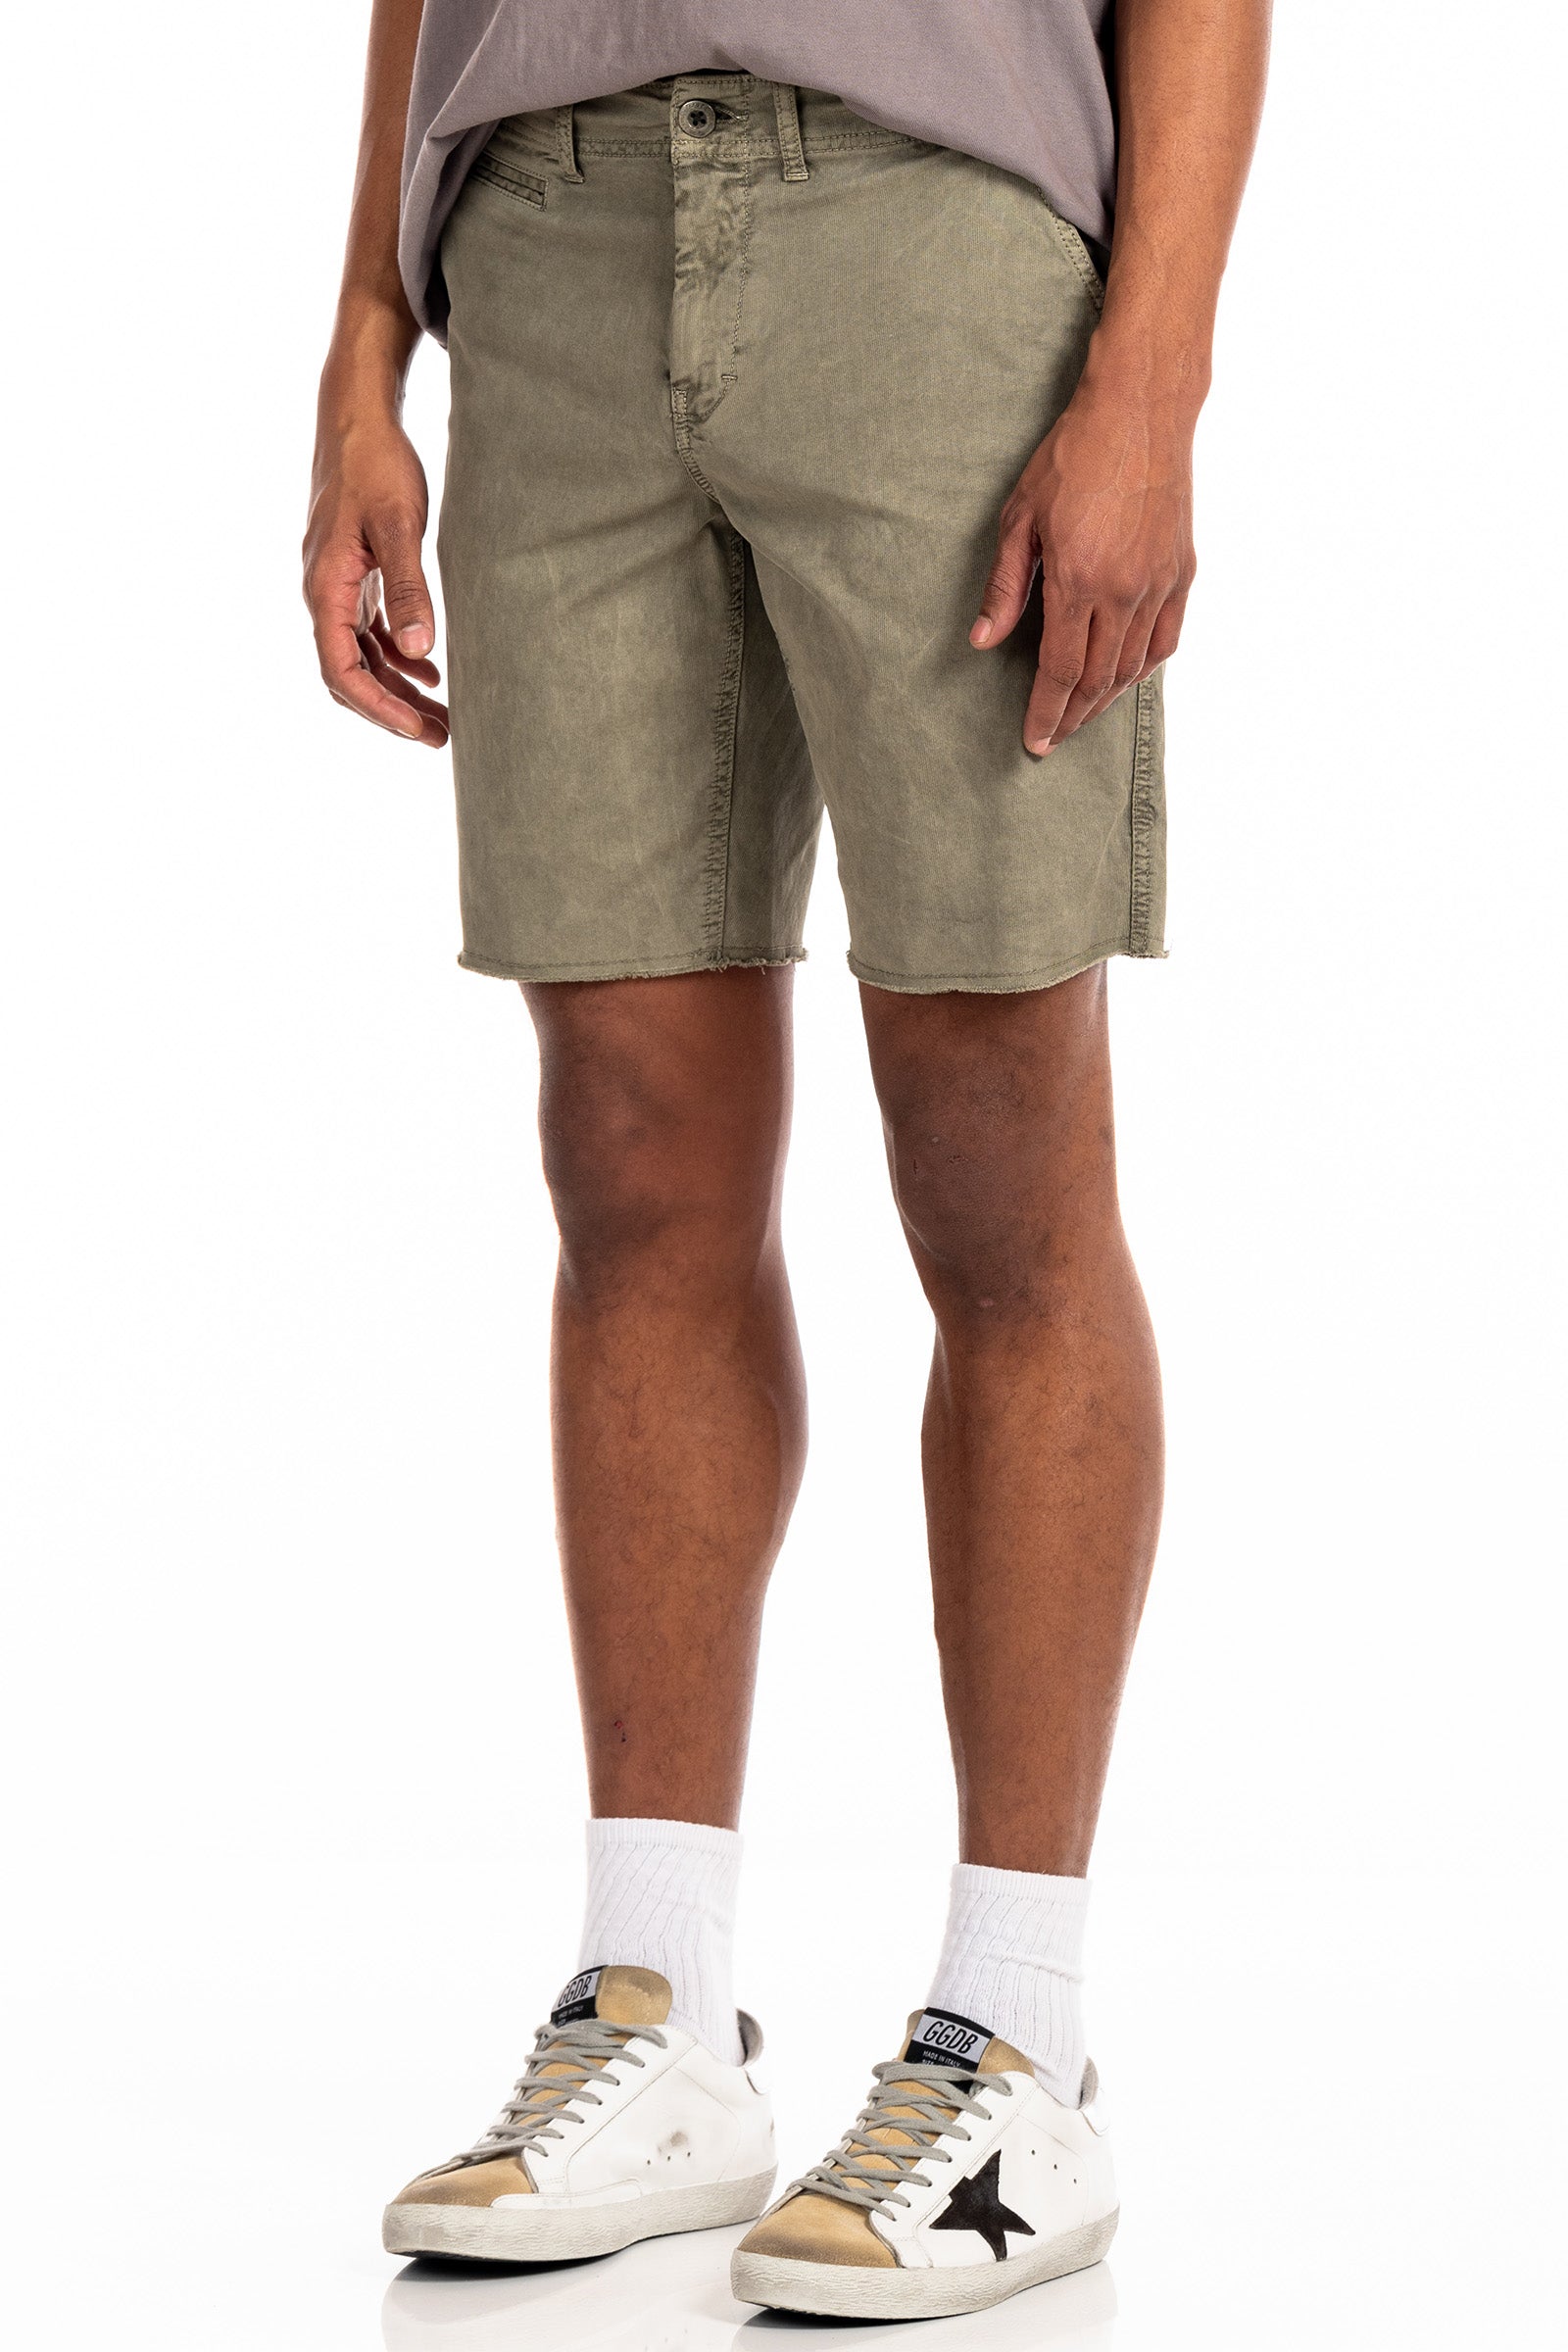 Brentwood Chino Short in Olive – Original Paperbacks